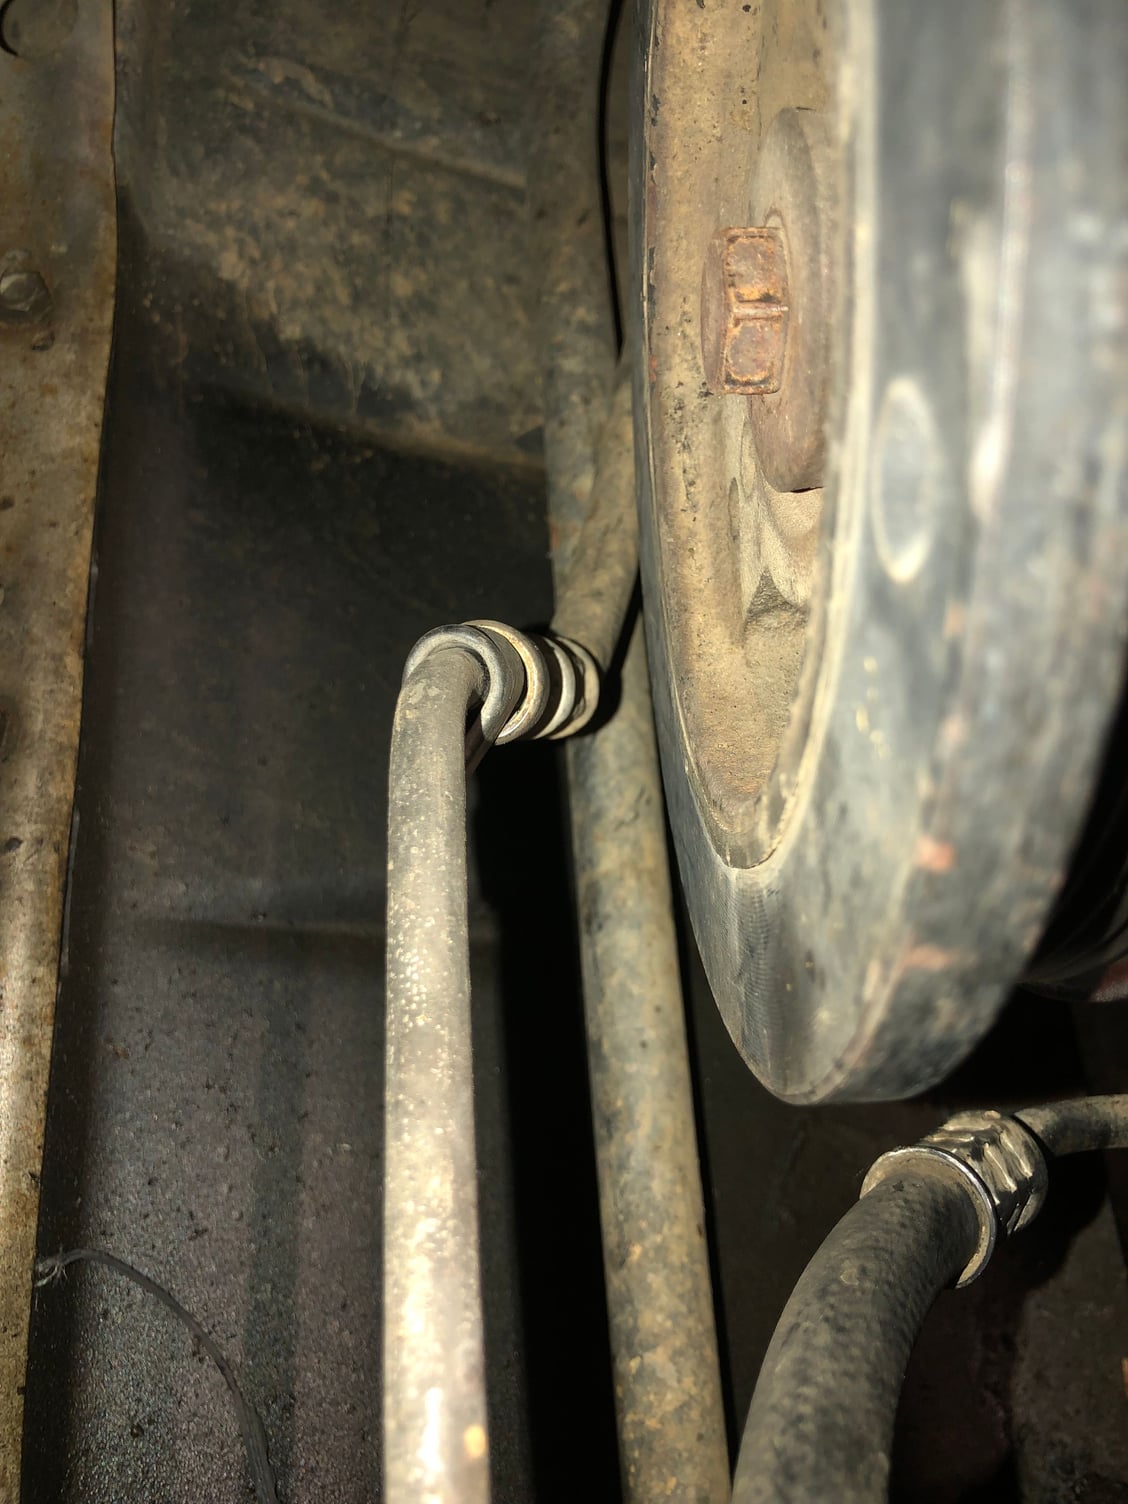 Serpentine Belt shredded and twisted up on fan shaft and dumped